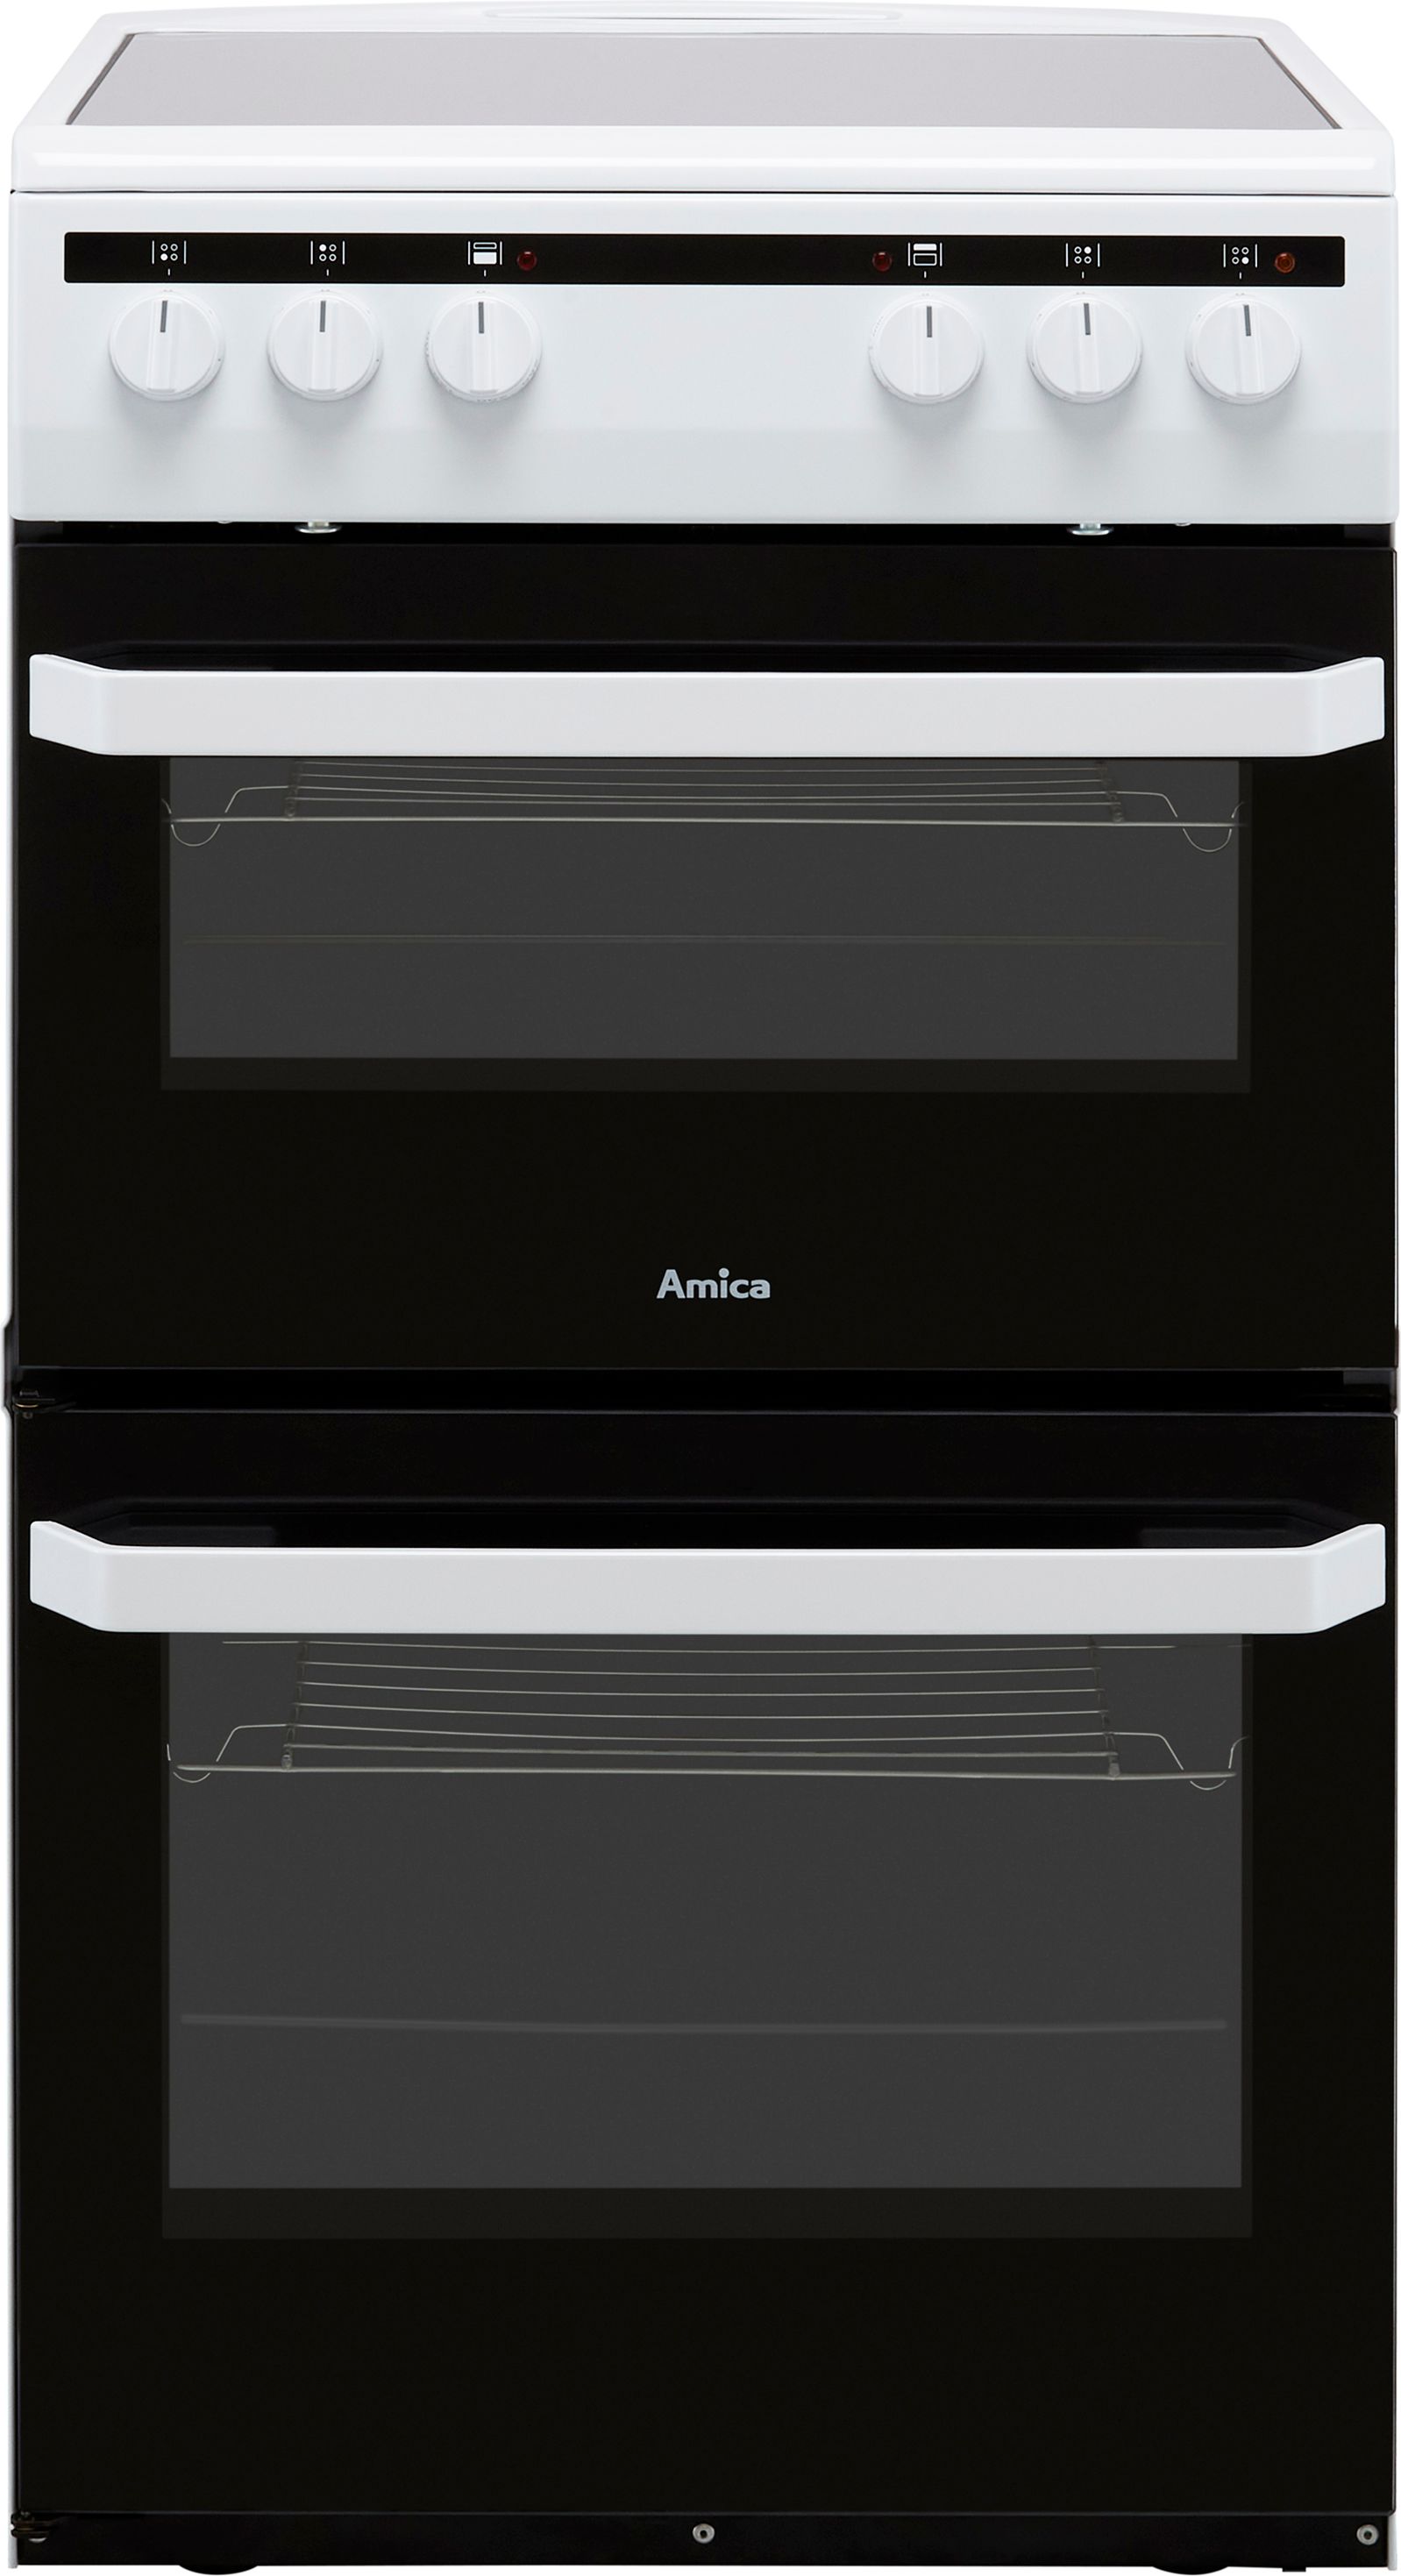 Amica AFC5100WH 50cm Electric Cooker with Ceramic Hob - White - A/A Rated, White